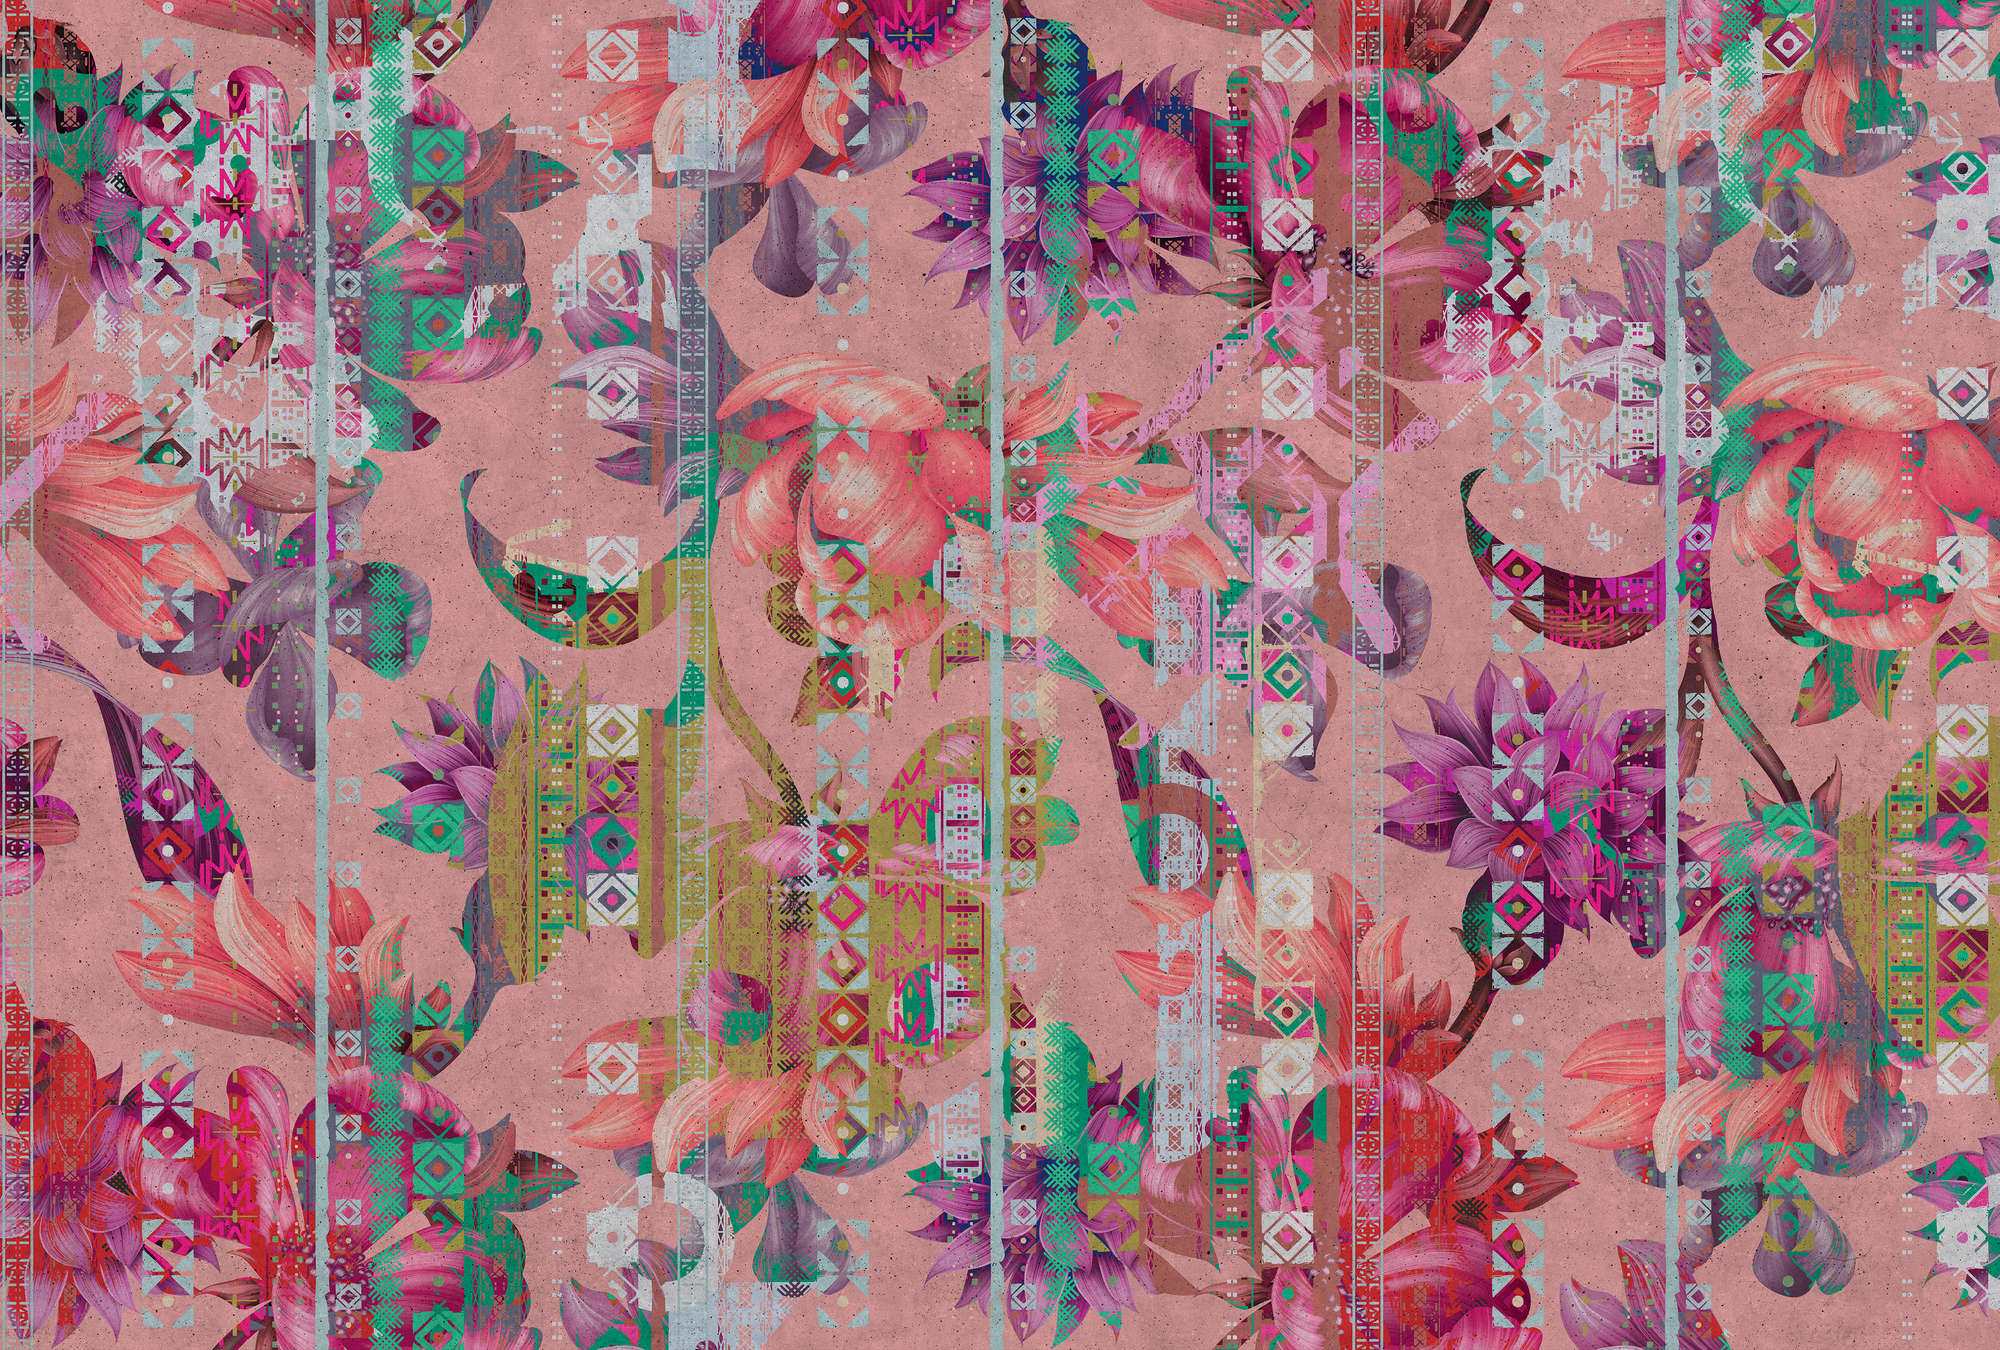             Photo wallpaper birds and plants pattern - pink, green
        